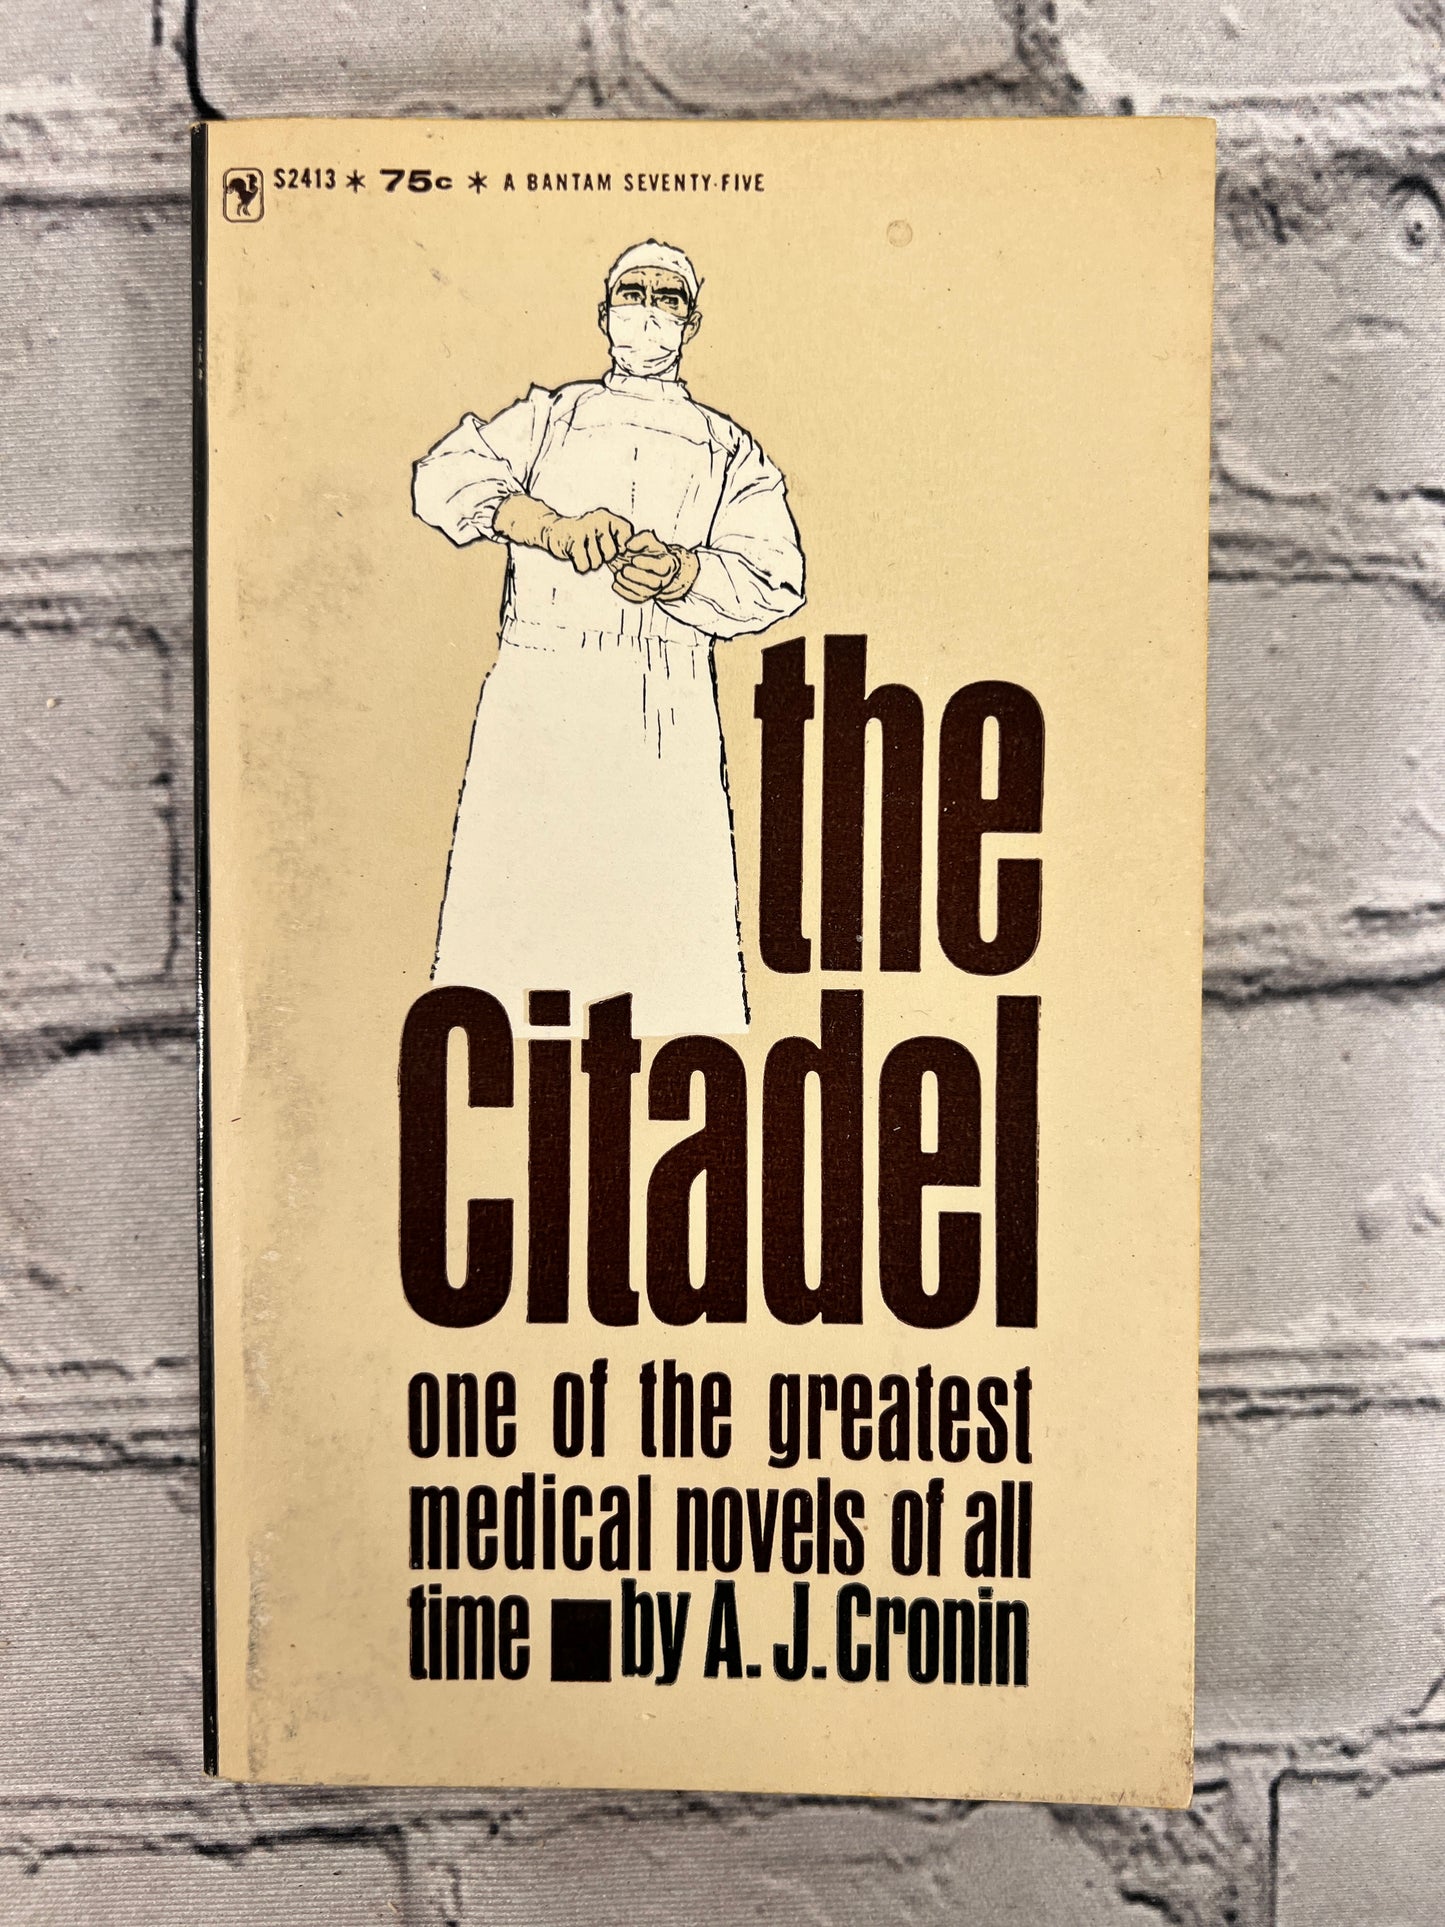 The Citadel one of the greatest medical novels of all time by A.J. Cronin [12th Print · 1962]